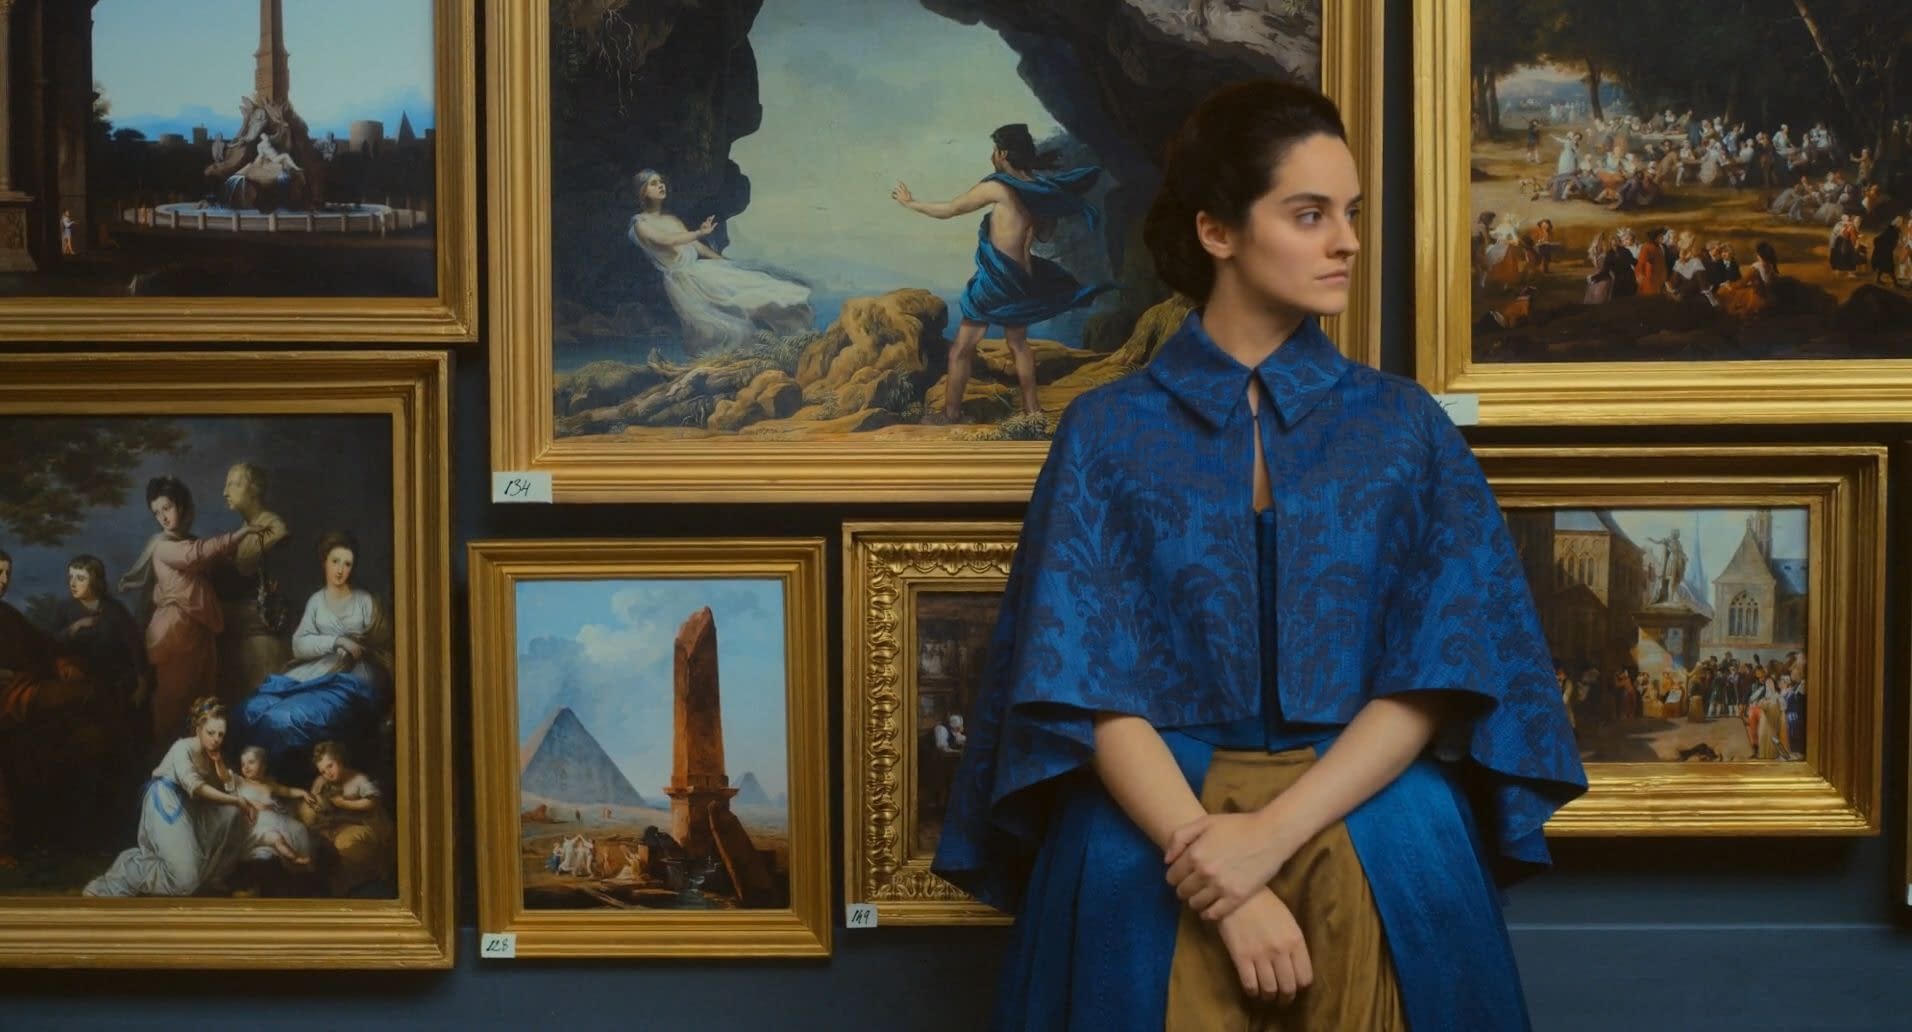 Still from Portrait of a Lady on Fire (2019). Marianne, dressed in an elegant blue dress with a cropped cloak over her shoulders, stands in front of an art gallery wall. There are several gold-framed paintings behind her, the largest depicting the myth of Orpheus and Eurydice.